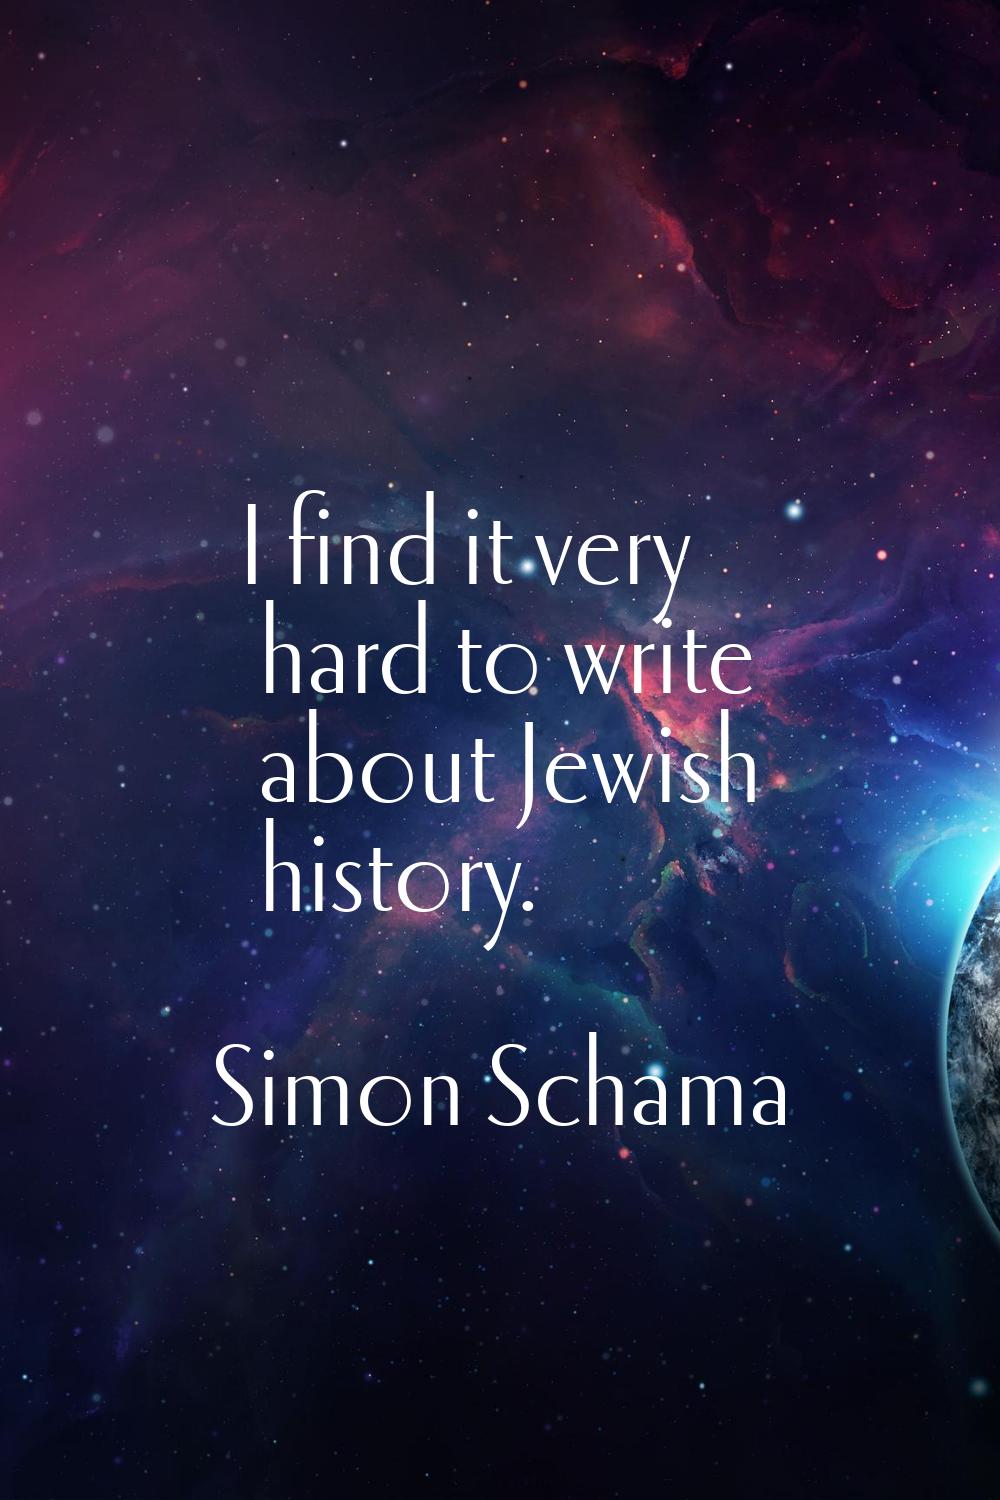 I find it very hard to write about Jewish history.